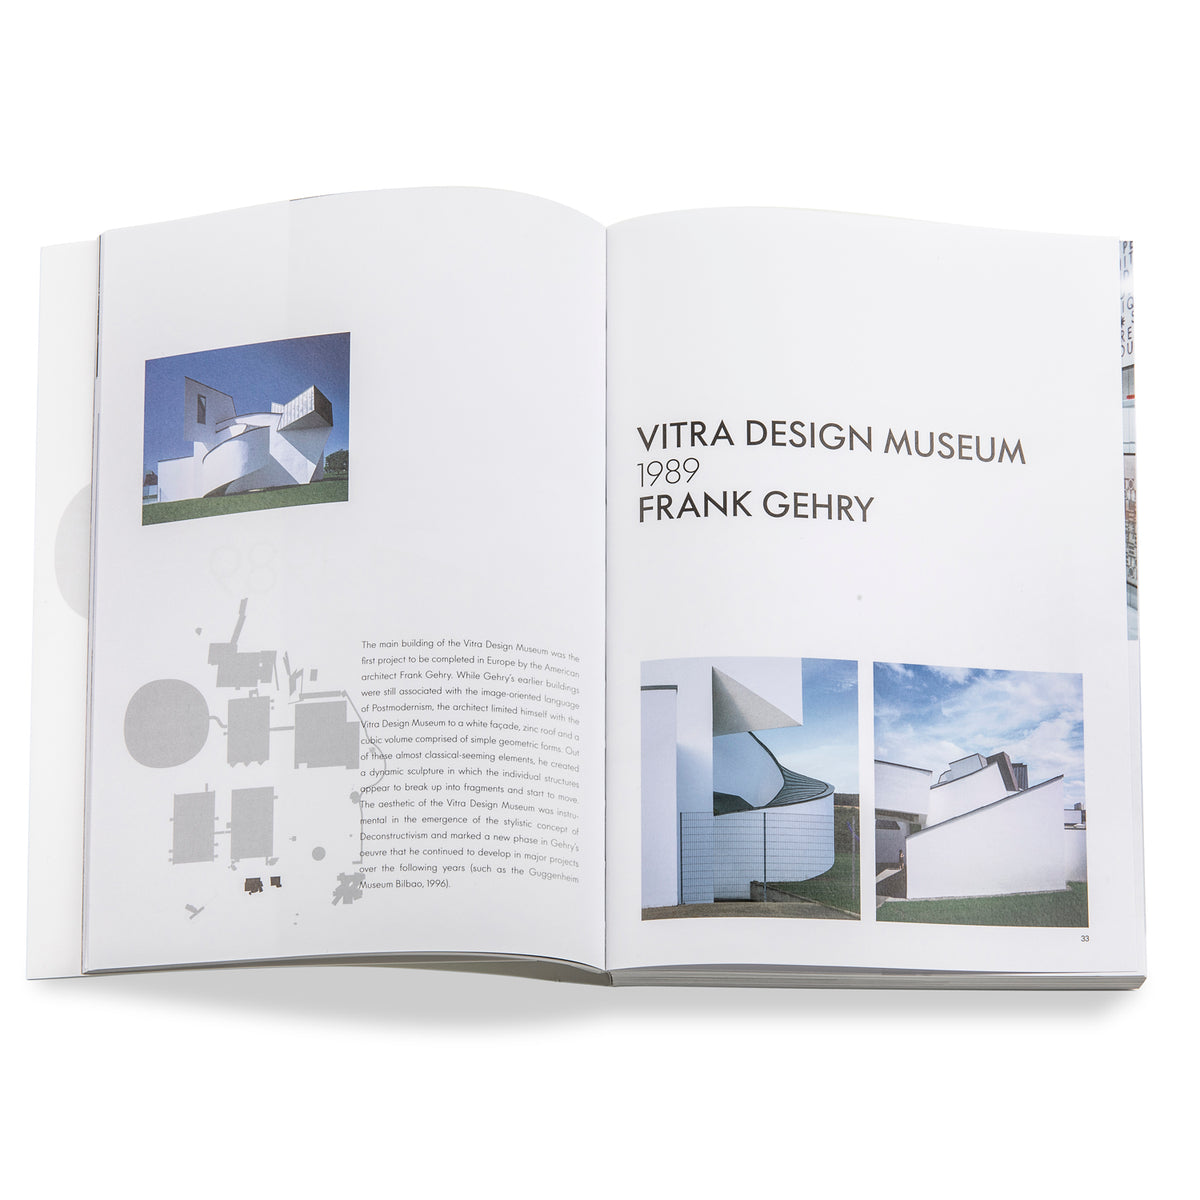 Le Vitra Campus : Architecture Design Industry by Vitra